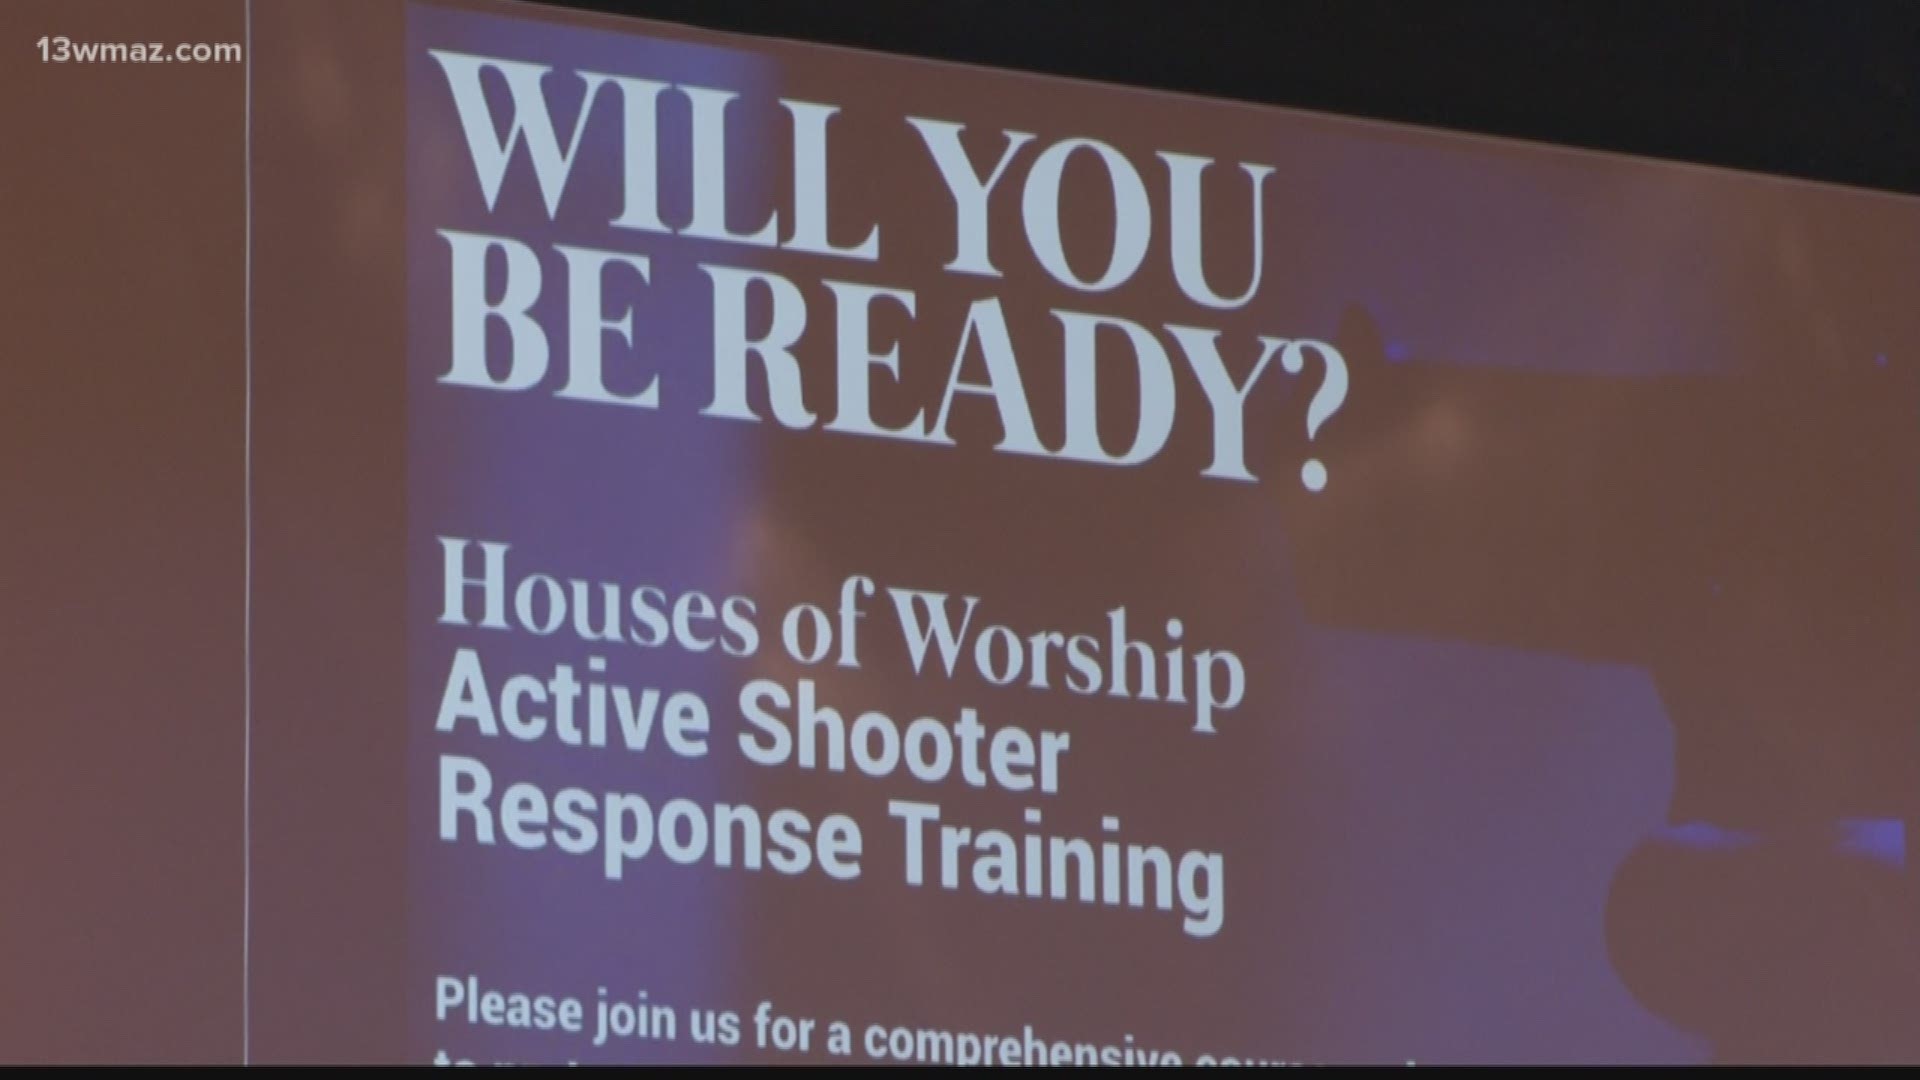 Northridge Christian Church in Milledgeville held a seminar where almost 200 people showed up to learn how to prepare for an active shooter.